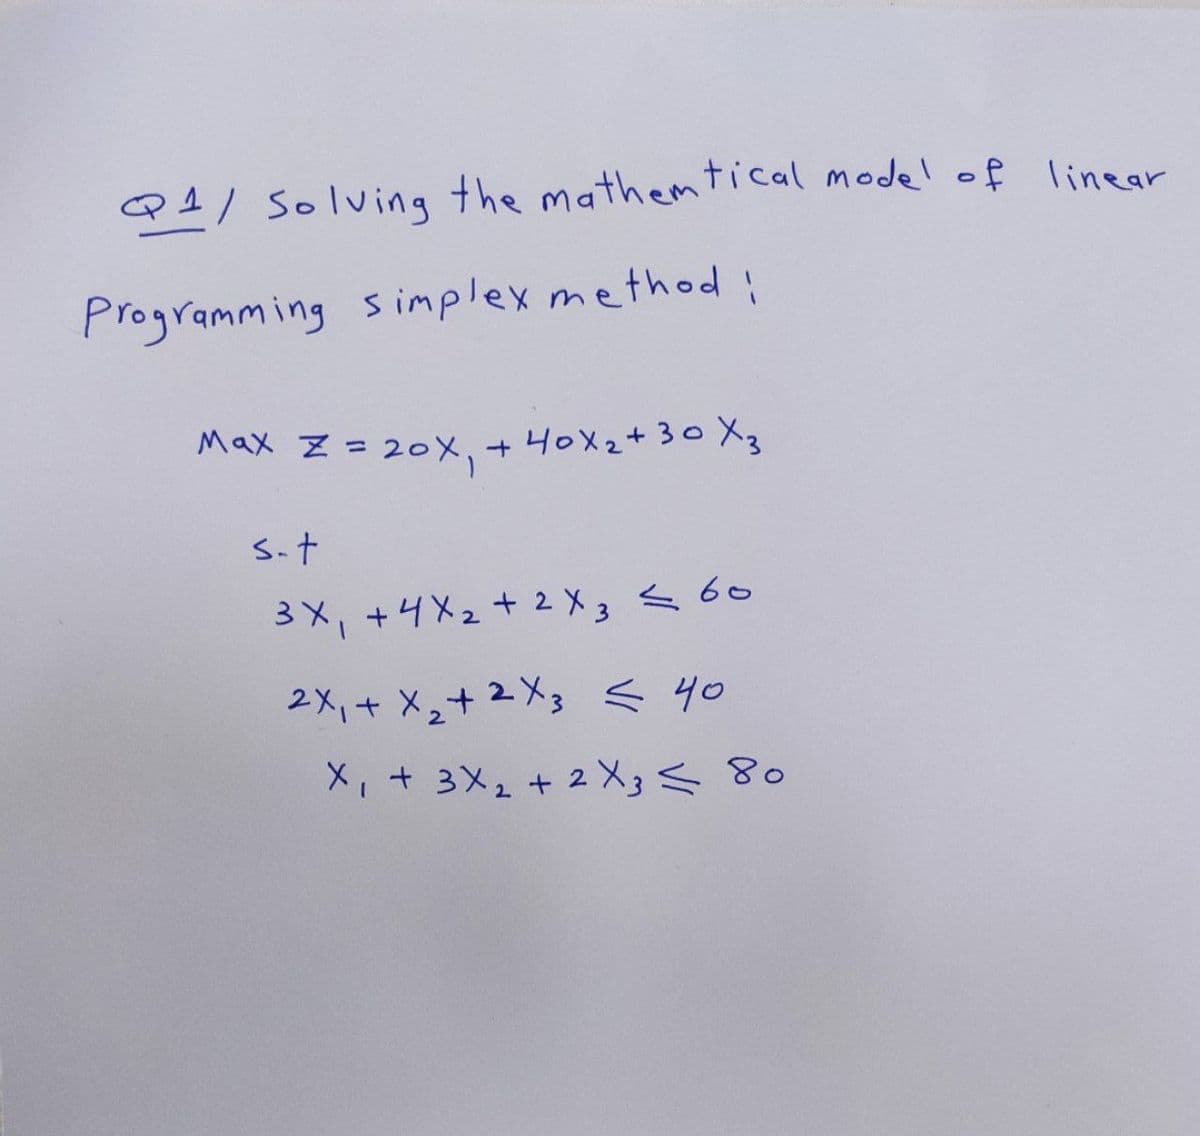 Q1/ Solving the mathematical model of linear
Programming simplex method:
Max Z = 20x₁ + 40x₂ + 30X3
s-t
3X₁ +4x₂+2 X 3 < 60
2x₁ + x₂ + 2x3 ≤ 40
X₁ + 3x₂ + 2 X 3 < 80